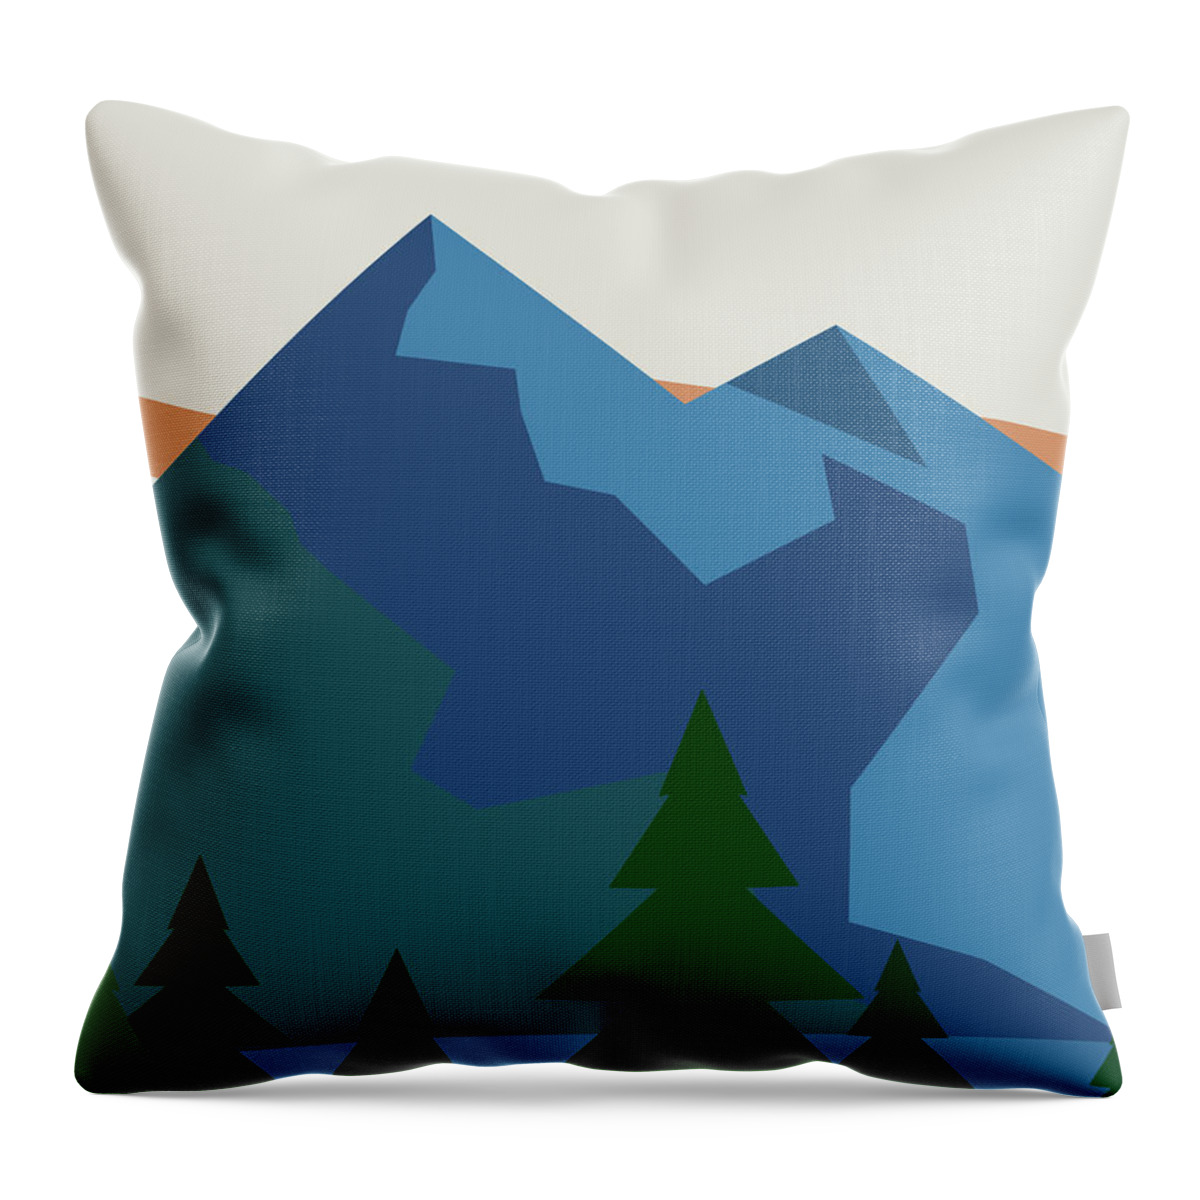 Beautiful Mountain Wilderness Throw Pillow featuring the digital art Beautiful Mountain Wilderness by Dan Sproul